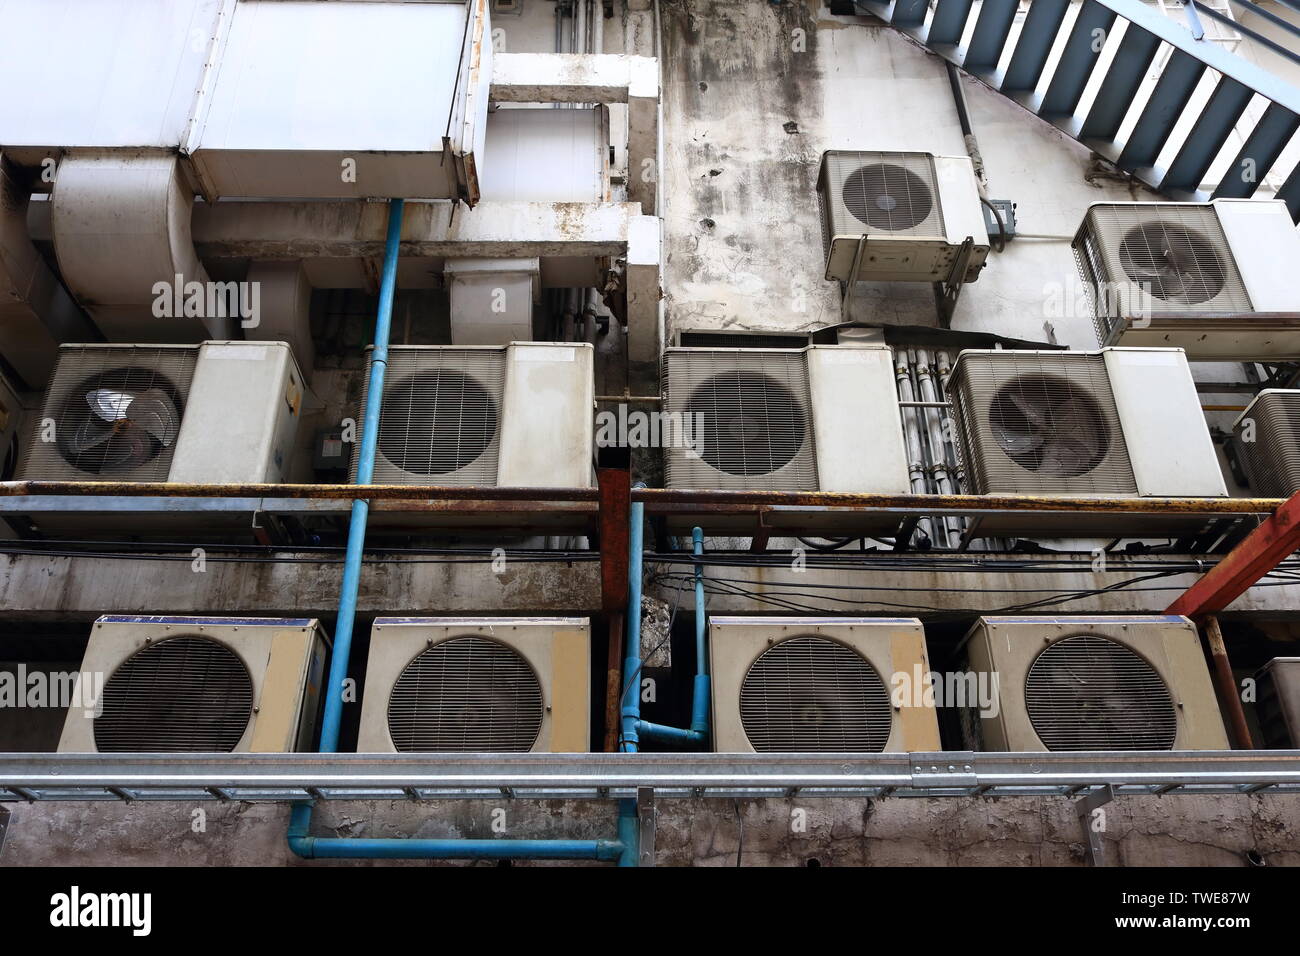 Group of condensing units of air conditioners installed on canopy behind the building, behind the scenes concept Stock Photo